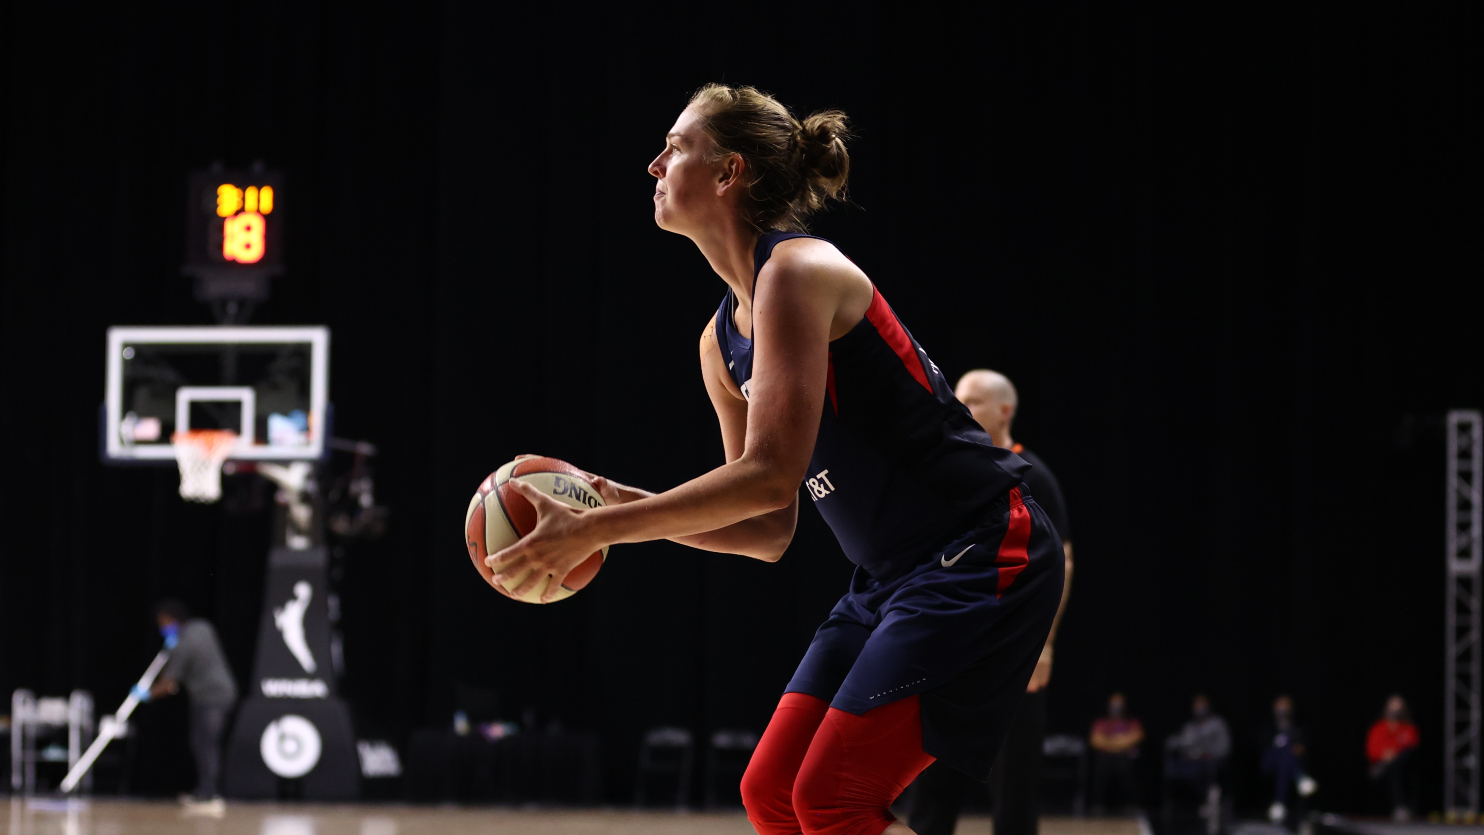 Mystics Playoff Push Will Come Without Emma Meesseman Returning